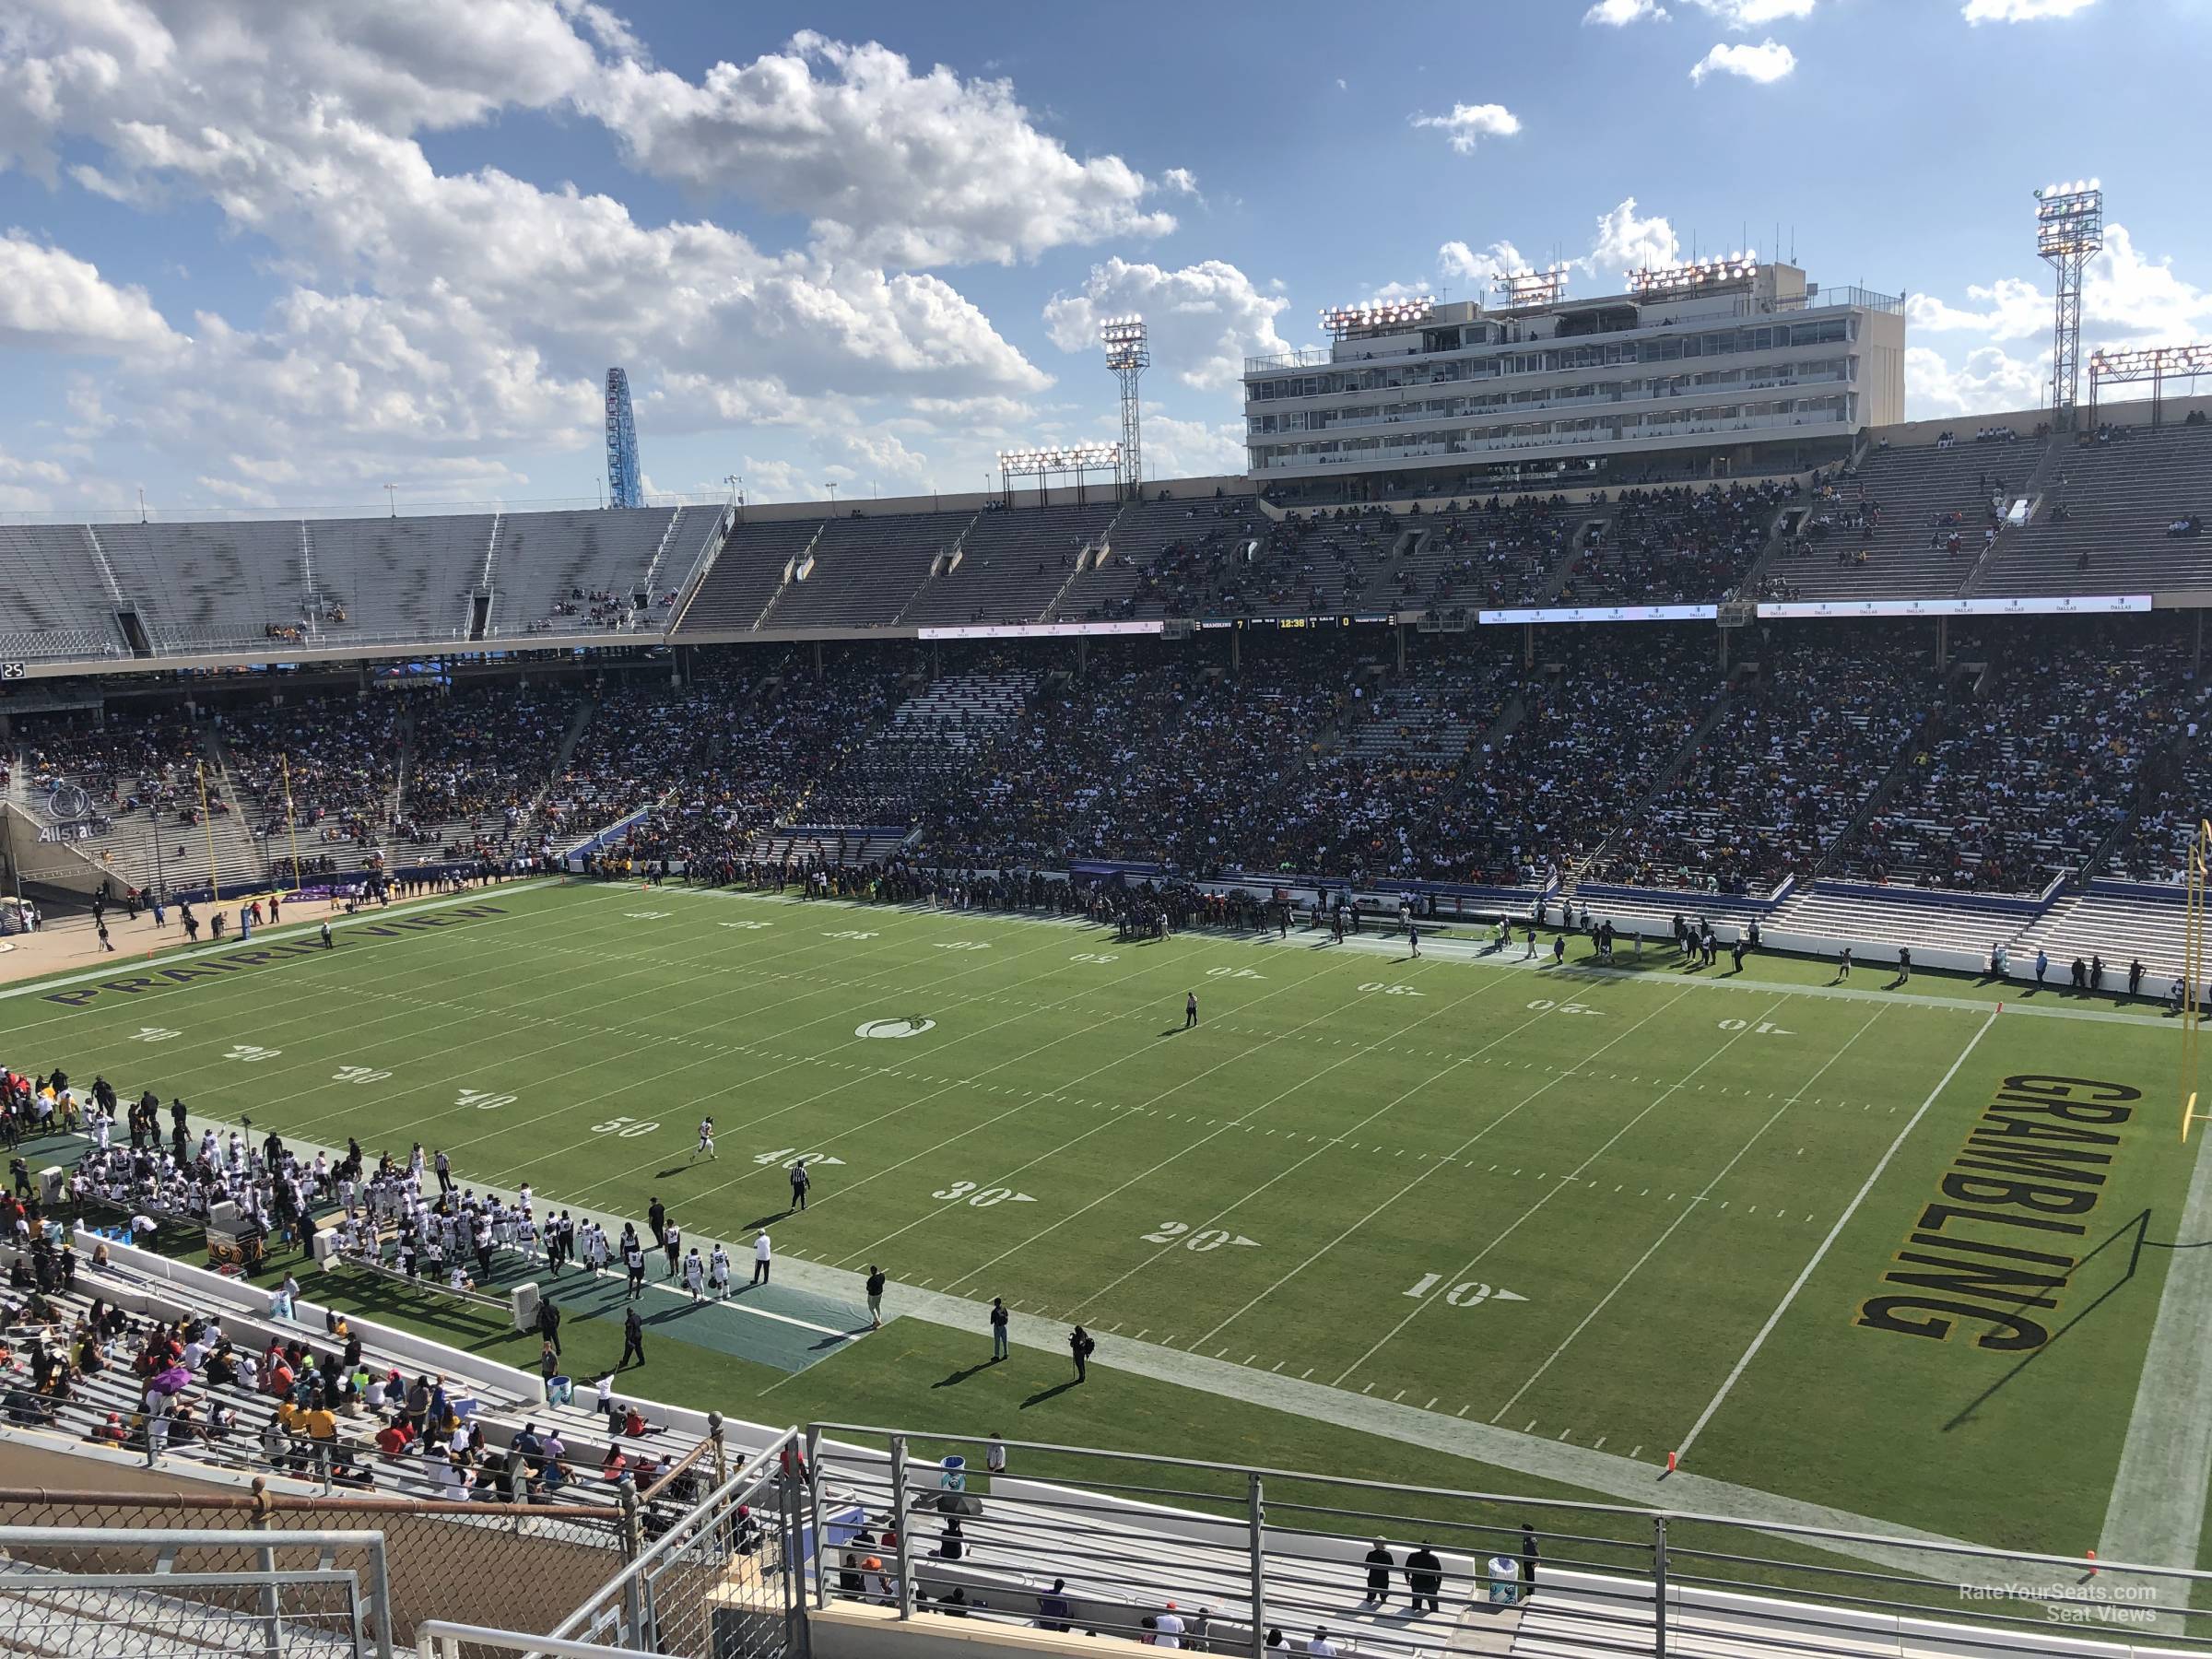 section 124, row 8 seat view  - cotton bowl